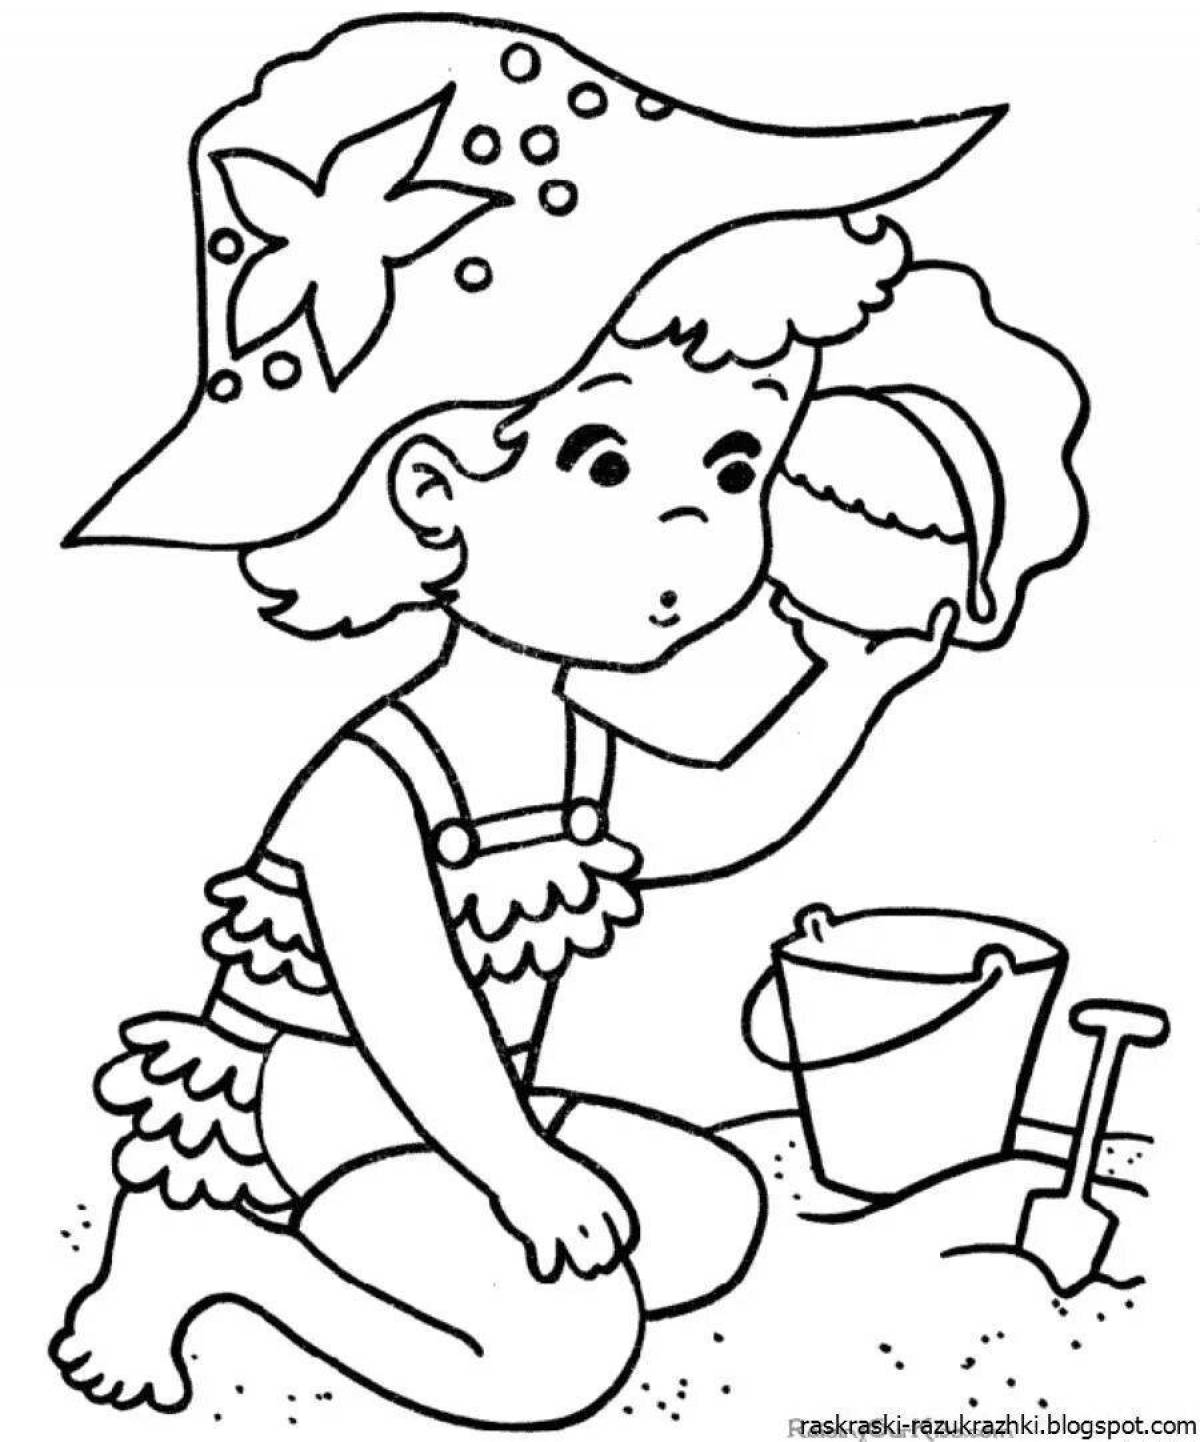 Adorable summer coloring book for kids